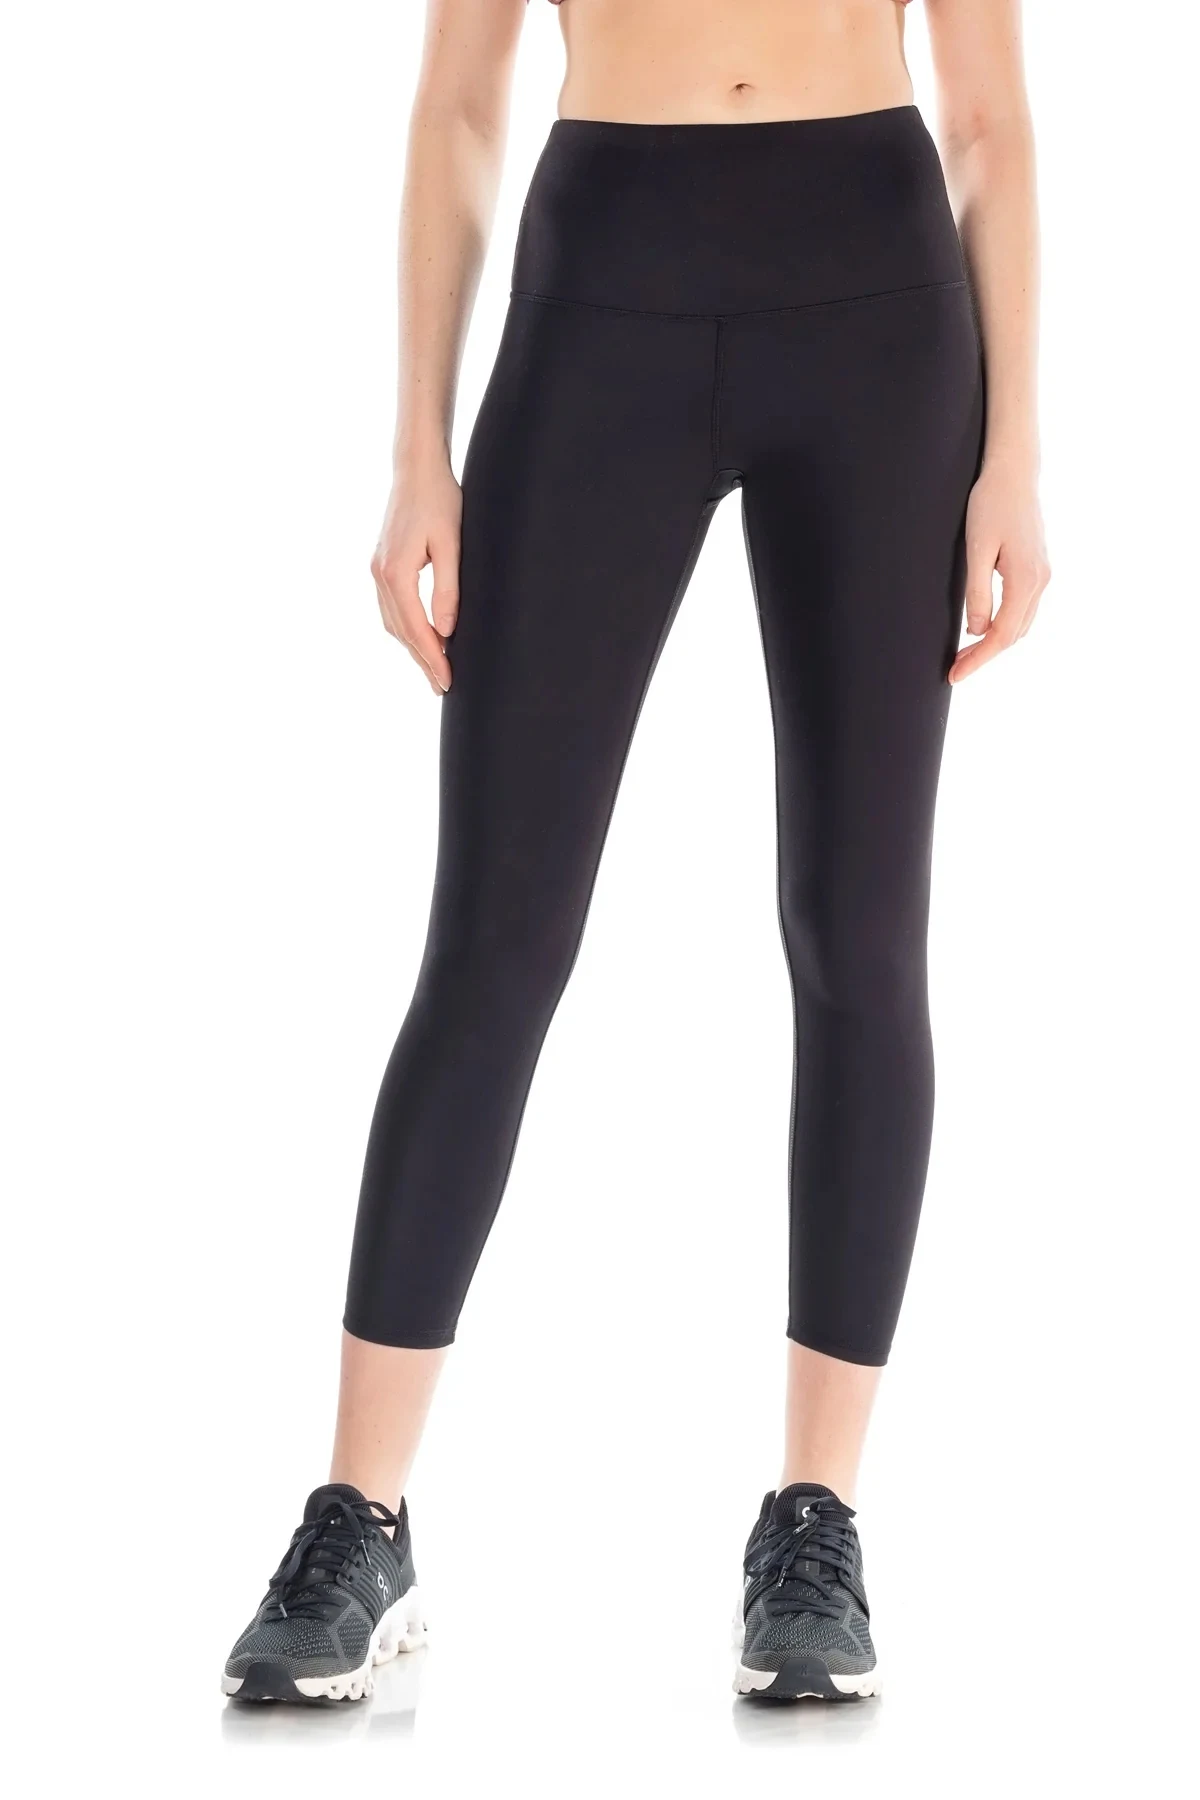 Best Black Leggings, Tights and Yoga Pants - Schimiggy Reviews